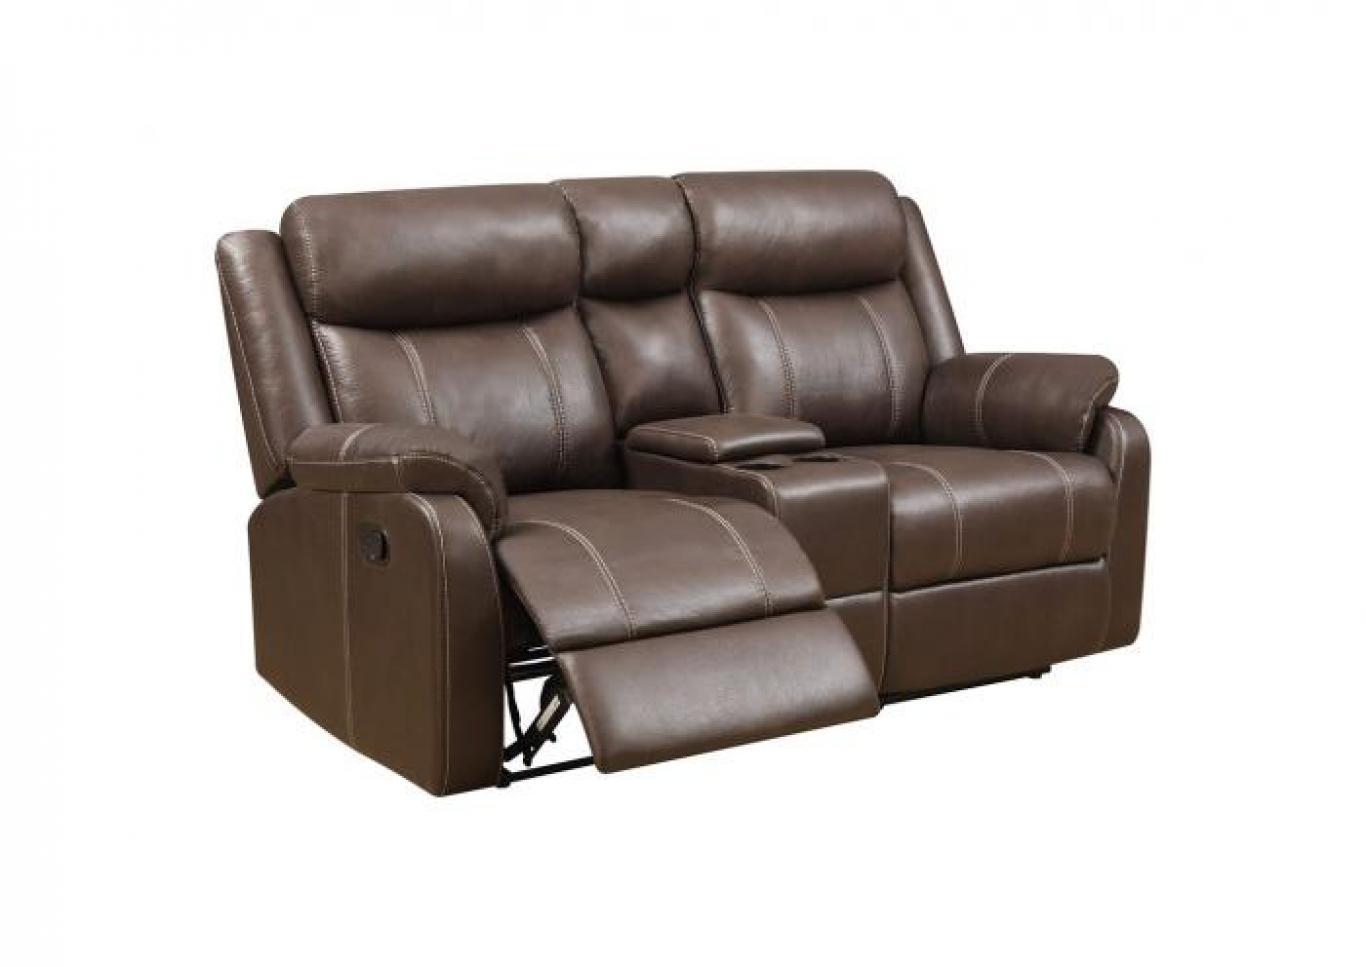 Domino Dual Reclining Sofa and Love Seat - Brown,Instore